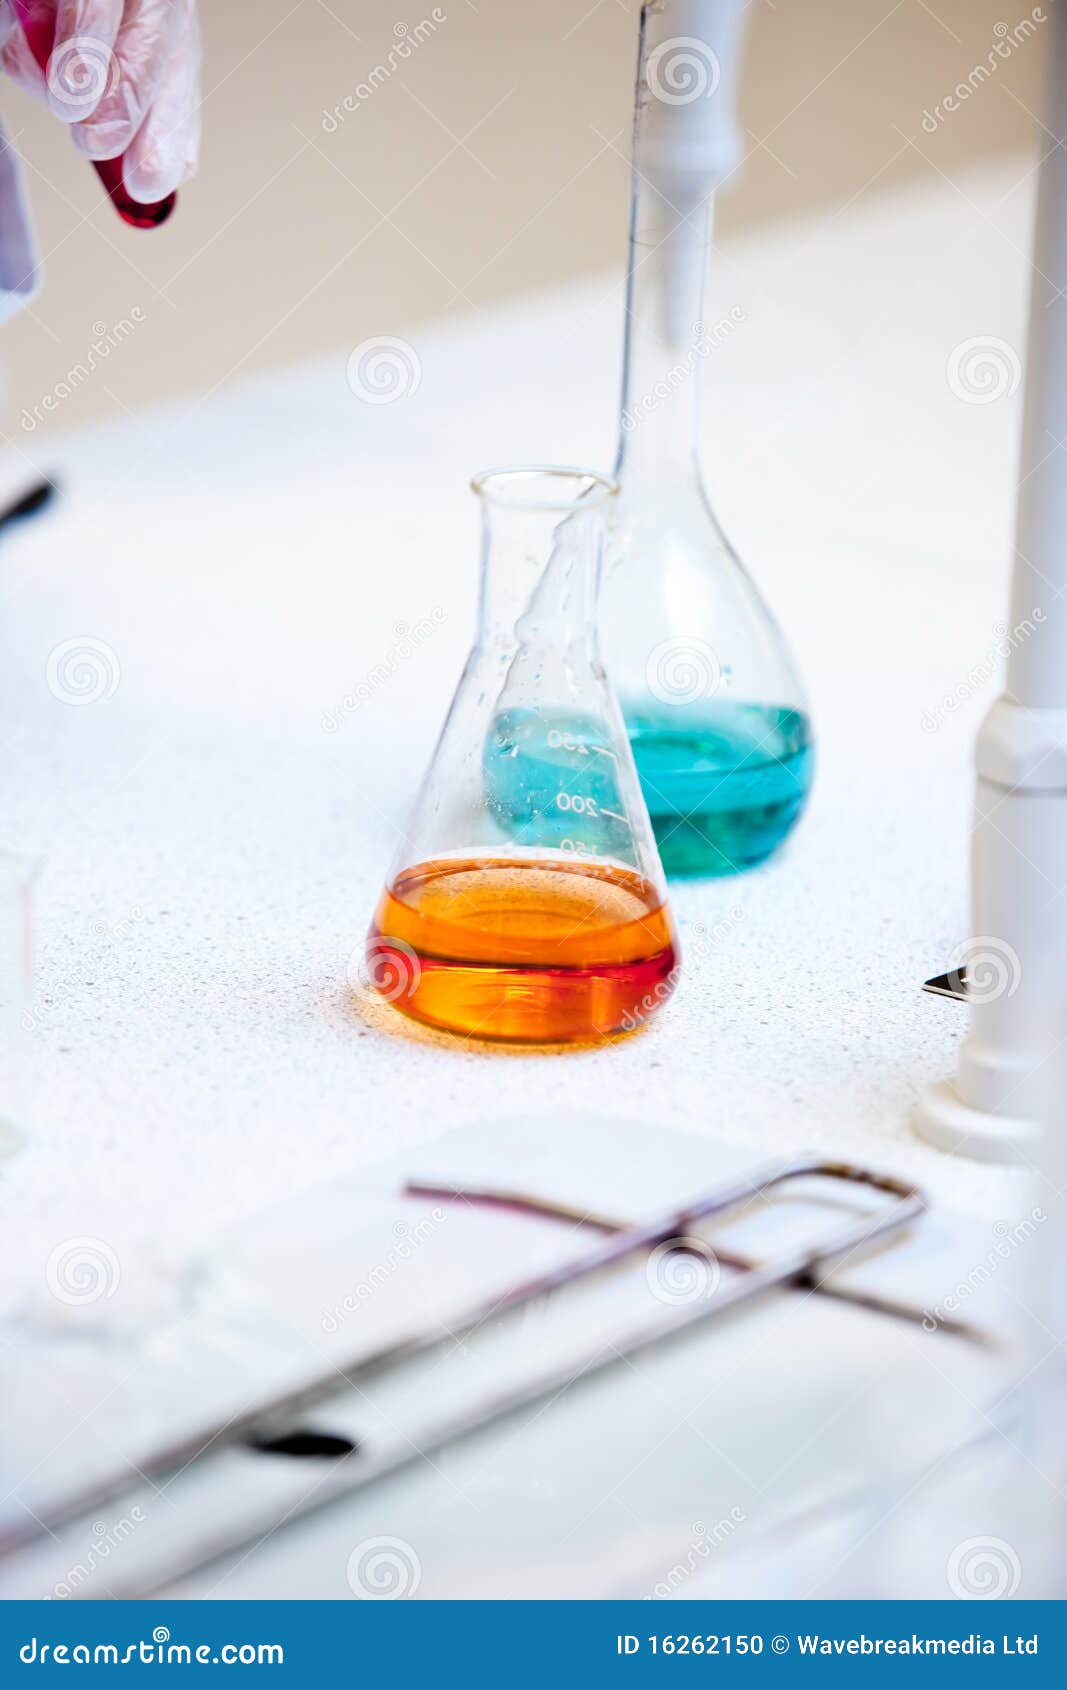 close-up of chemistry materials and liquids